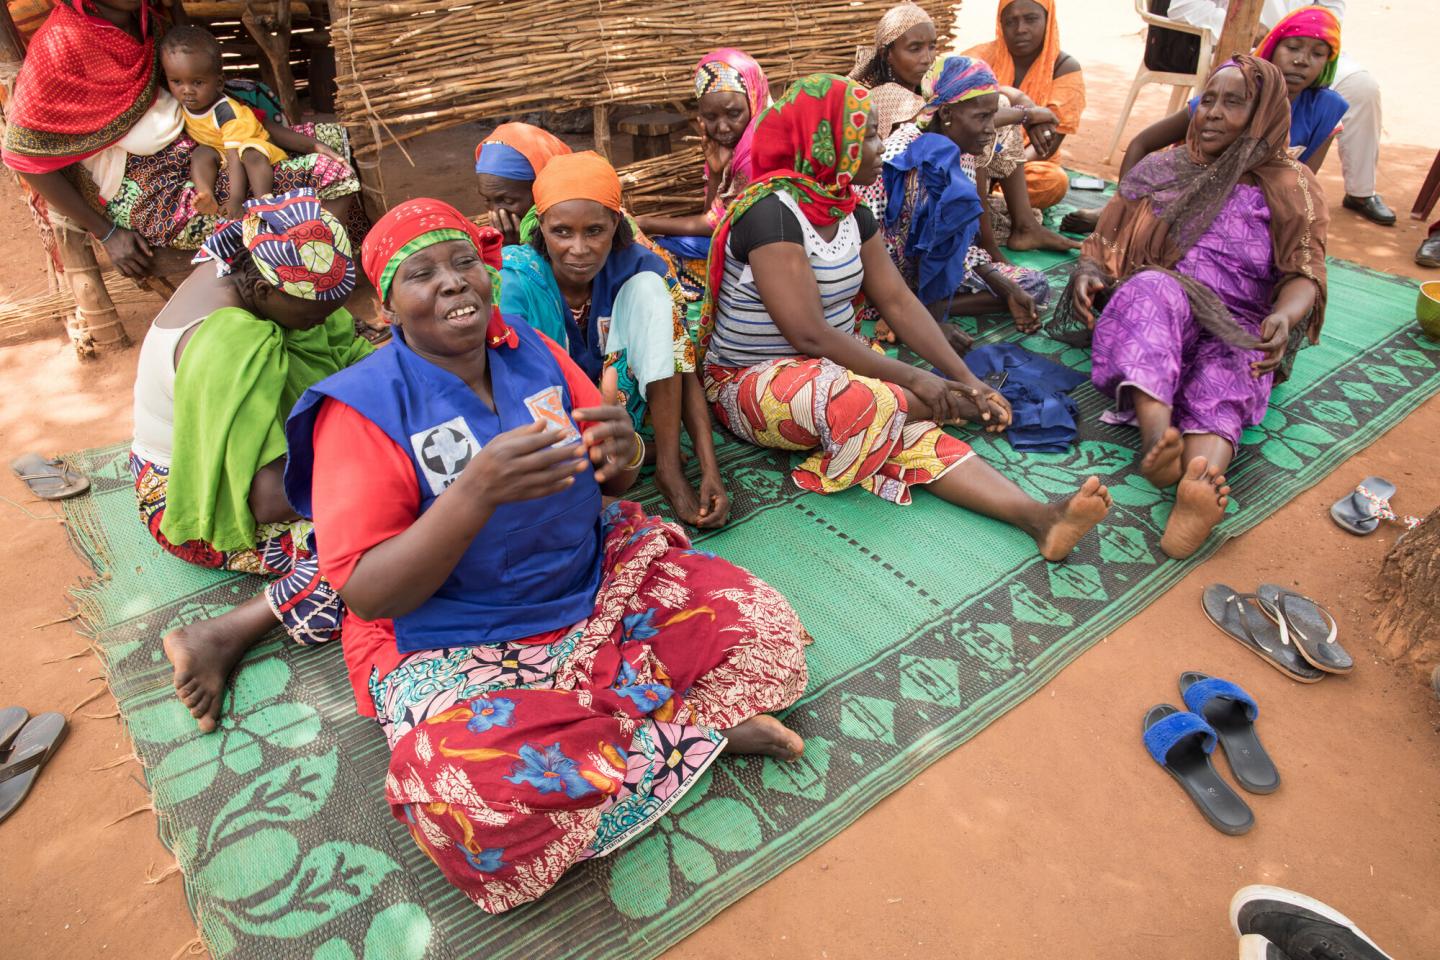 A group of Chadian women sit on a green mat